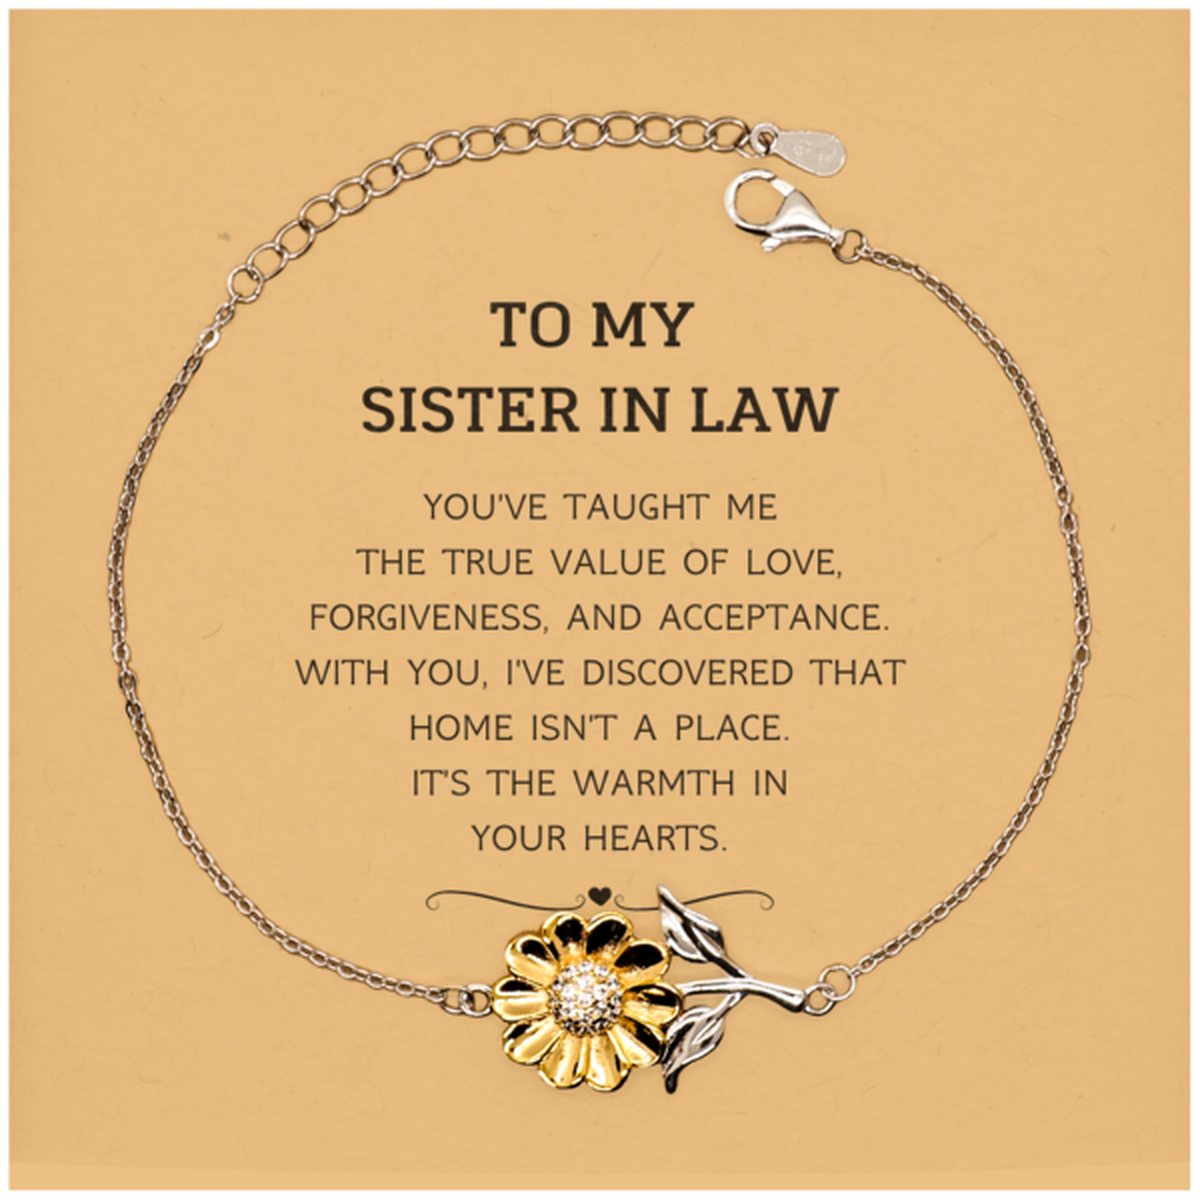 To My Sister In Law Gifts, You've taught me the true value of love, Thank You Gifts For Sister In Law, Birthday Christmas Sunflower Bracelet For Sister In Law